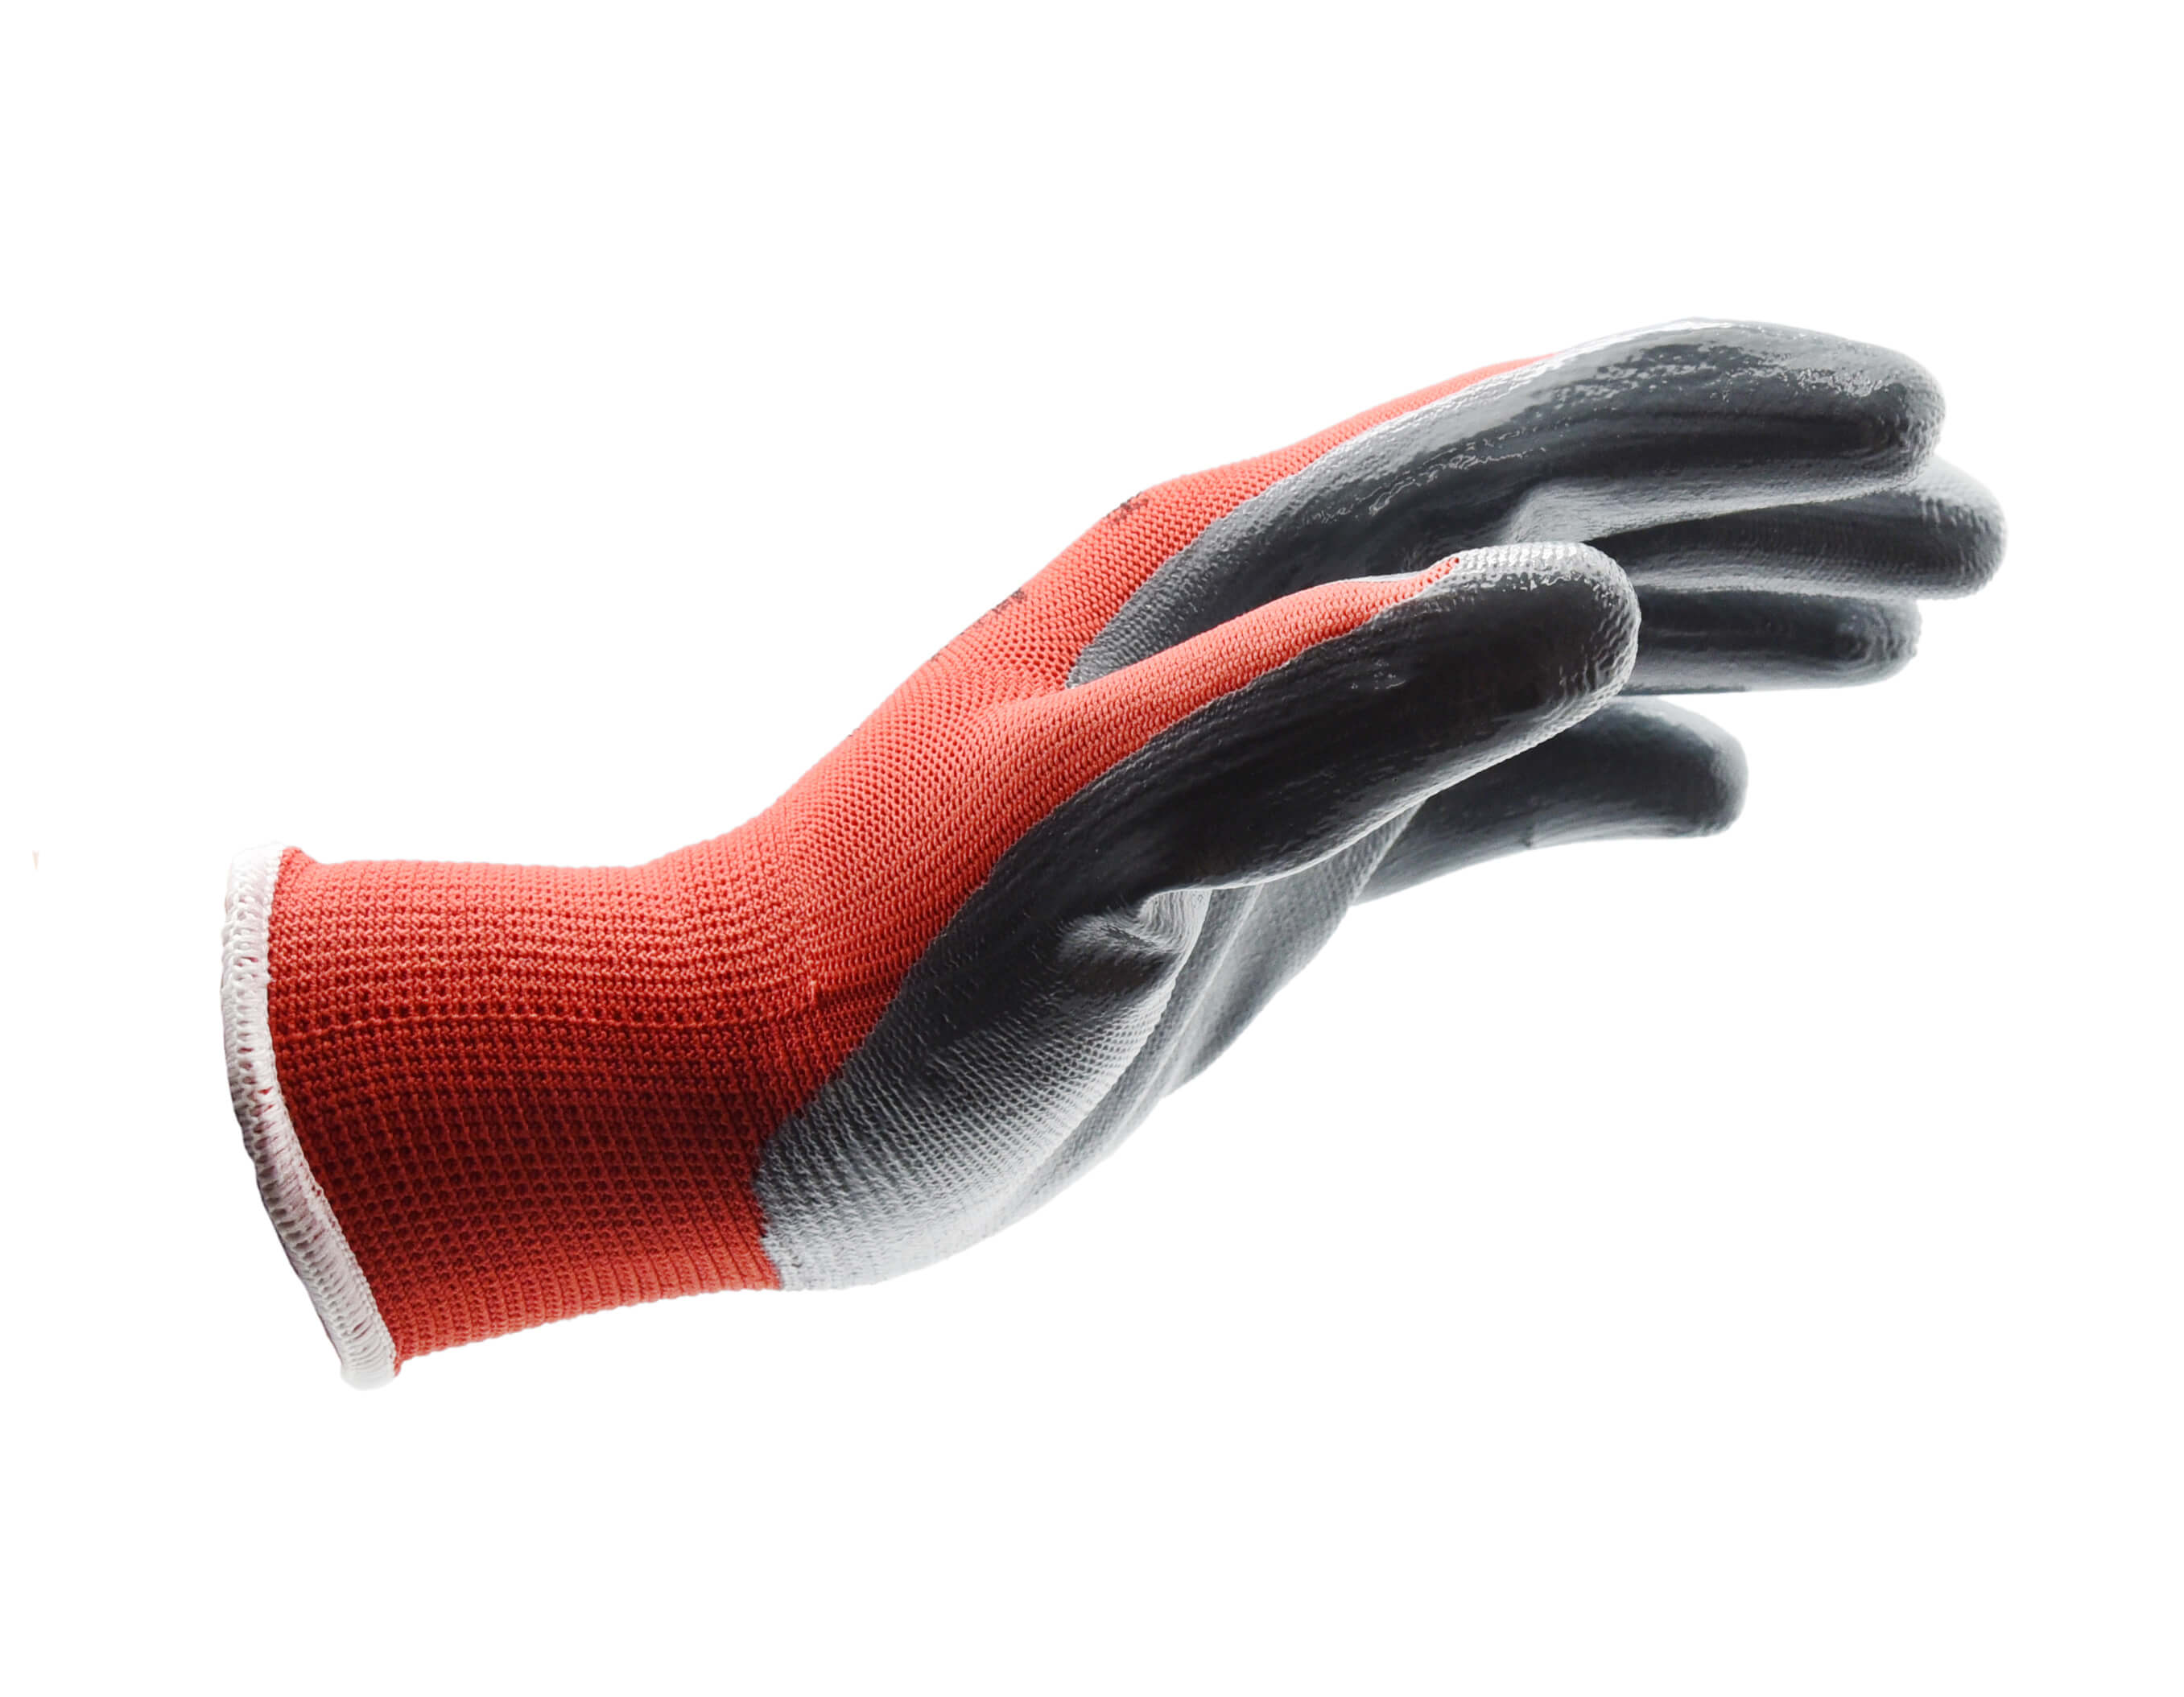 GREY SMOOTH NITRILE PALM RED POLYESTER GLOVE SZ 11